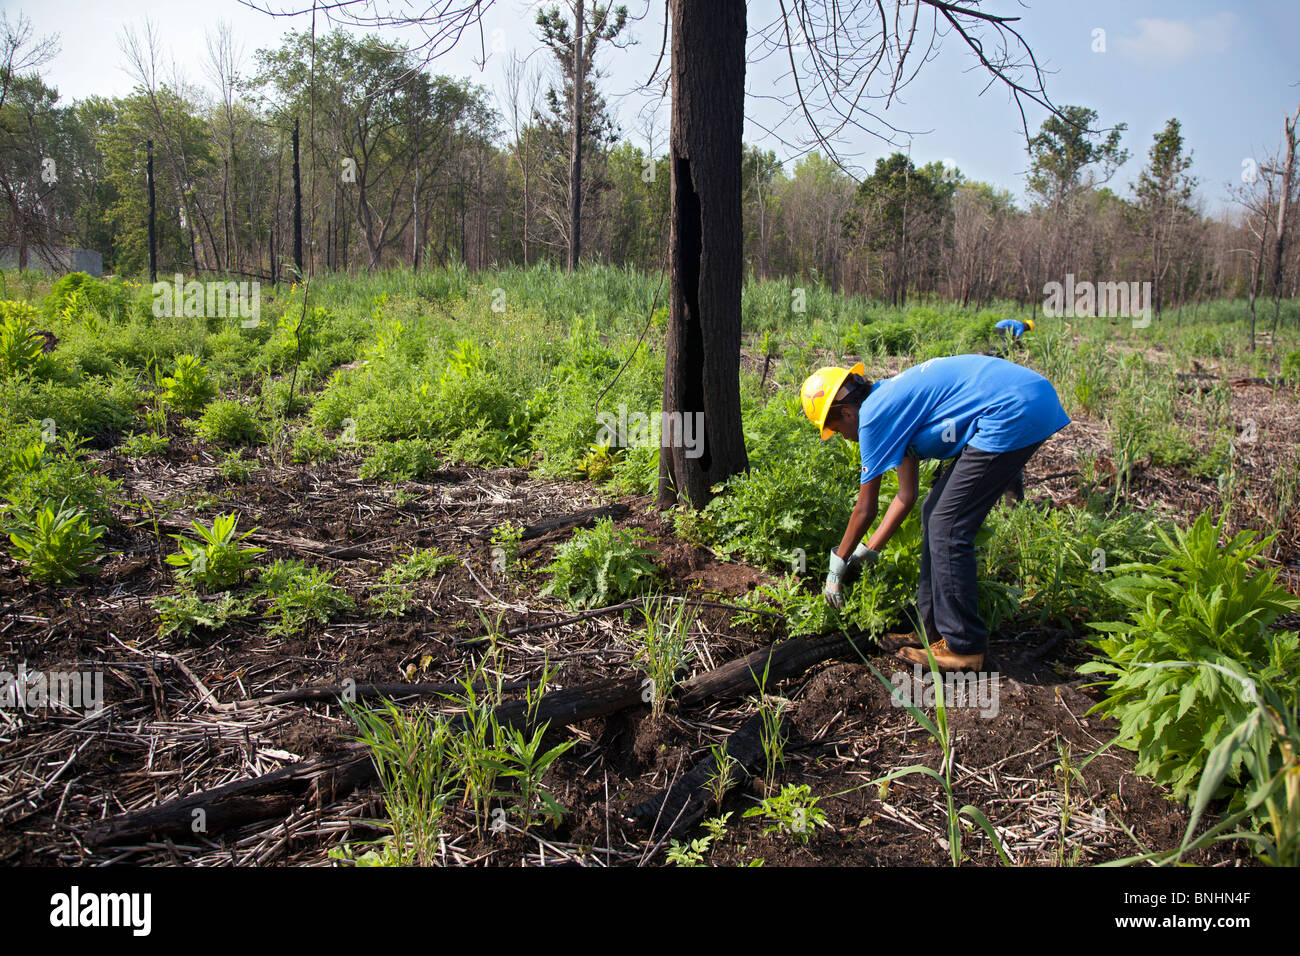 Students Working in Summer Job Program Remove Invasive Plants from Wetland in City Park Stock Photo